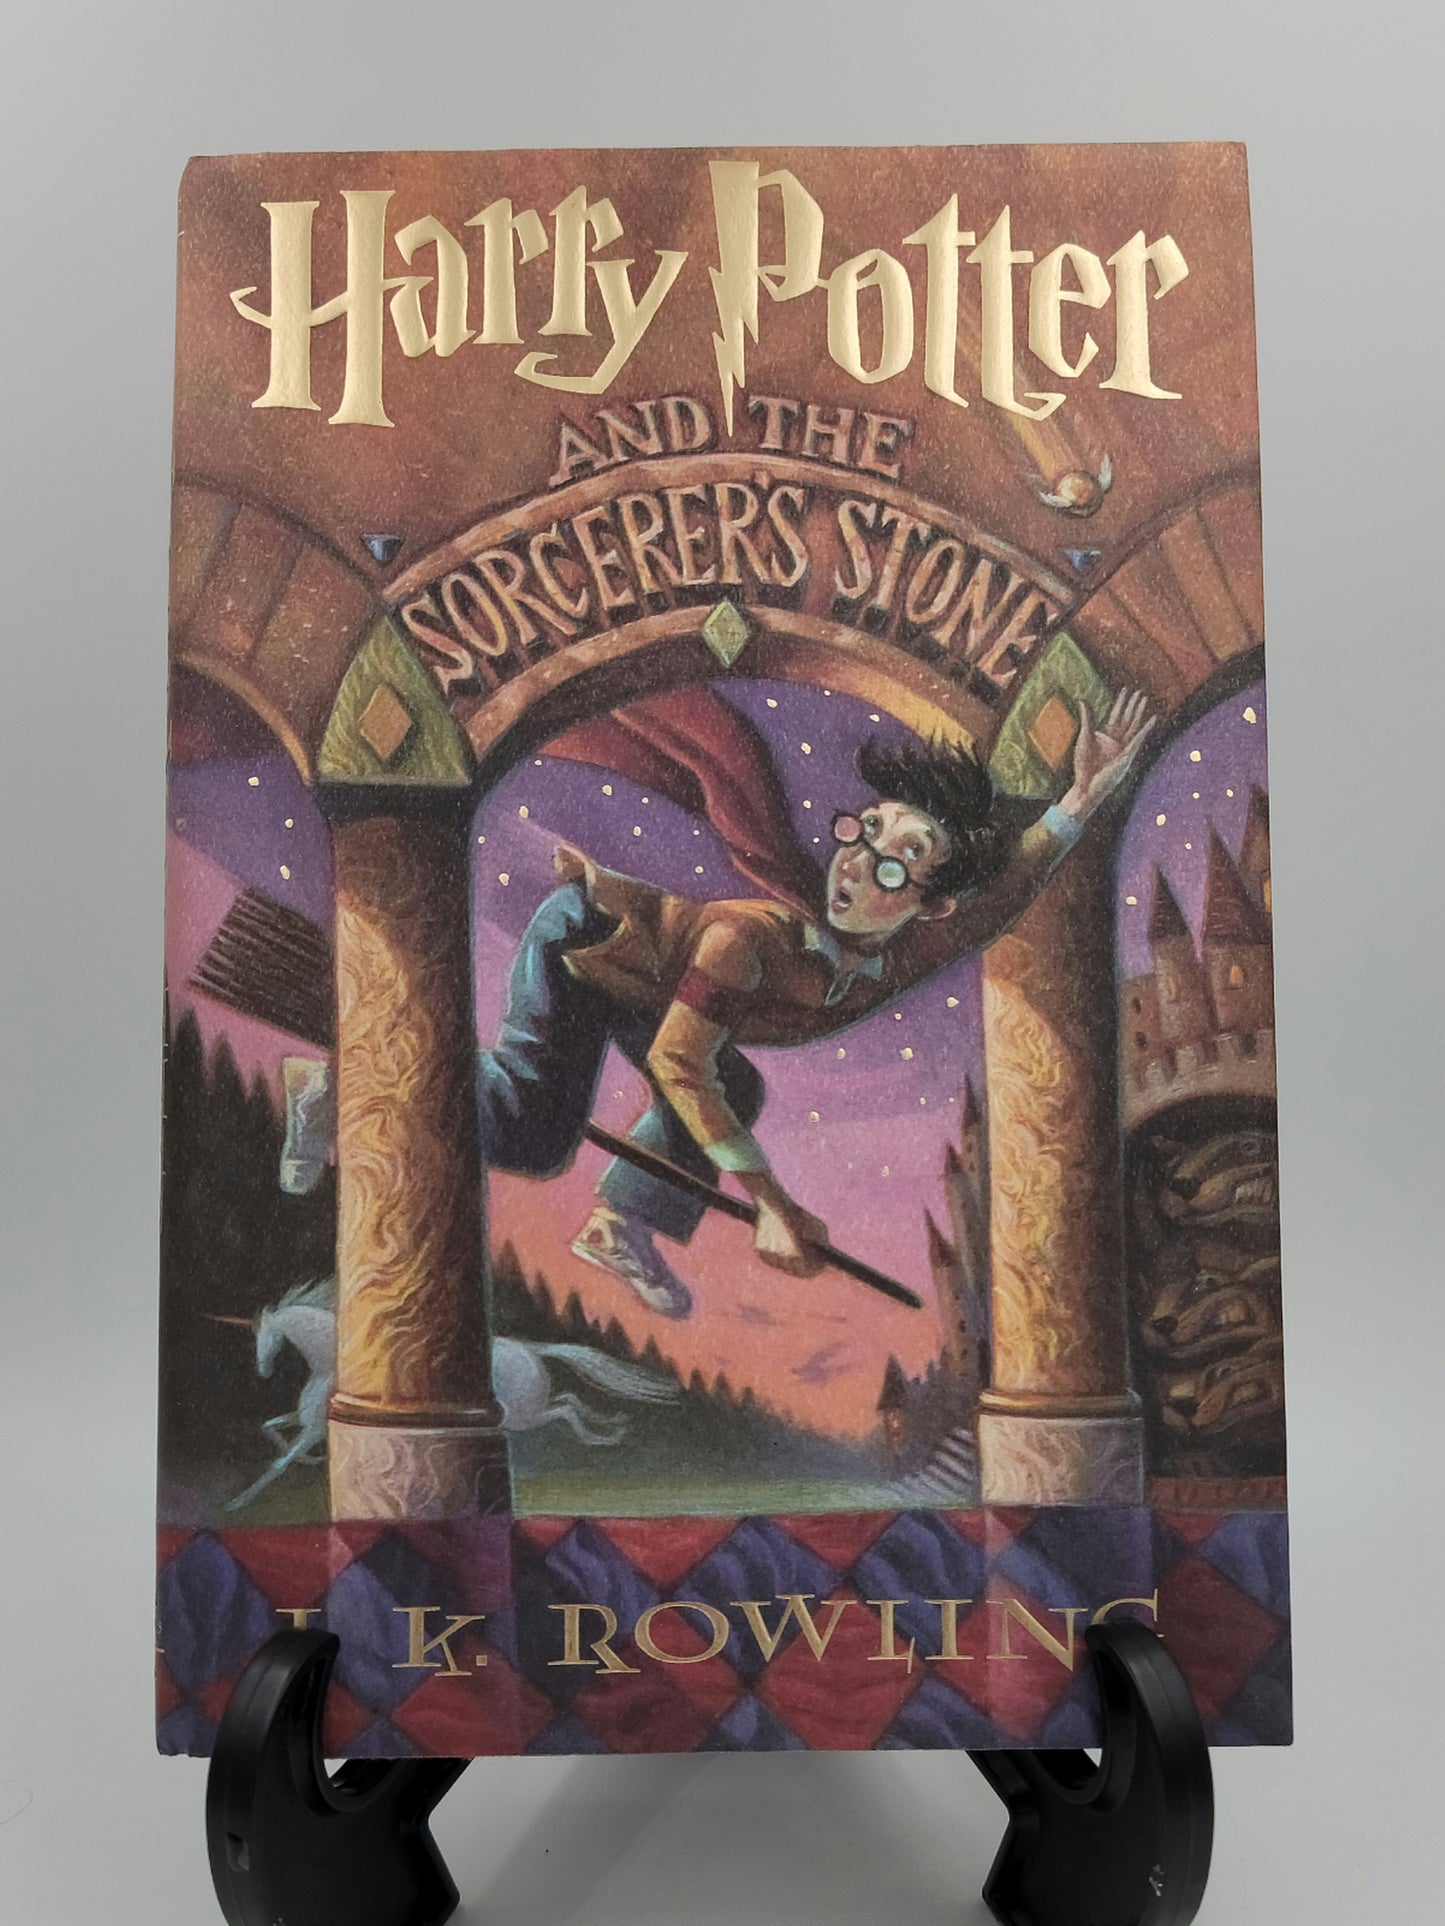 Harry Potter and the Sorcerer's Stone By: J. K. Rowling (Harry Potter Series #1)